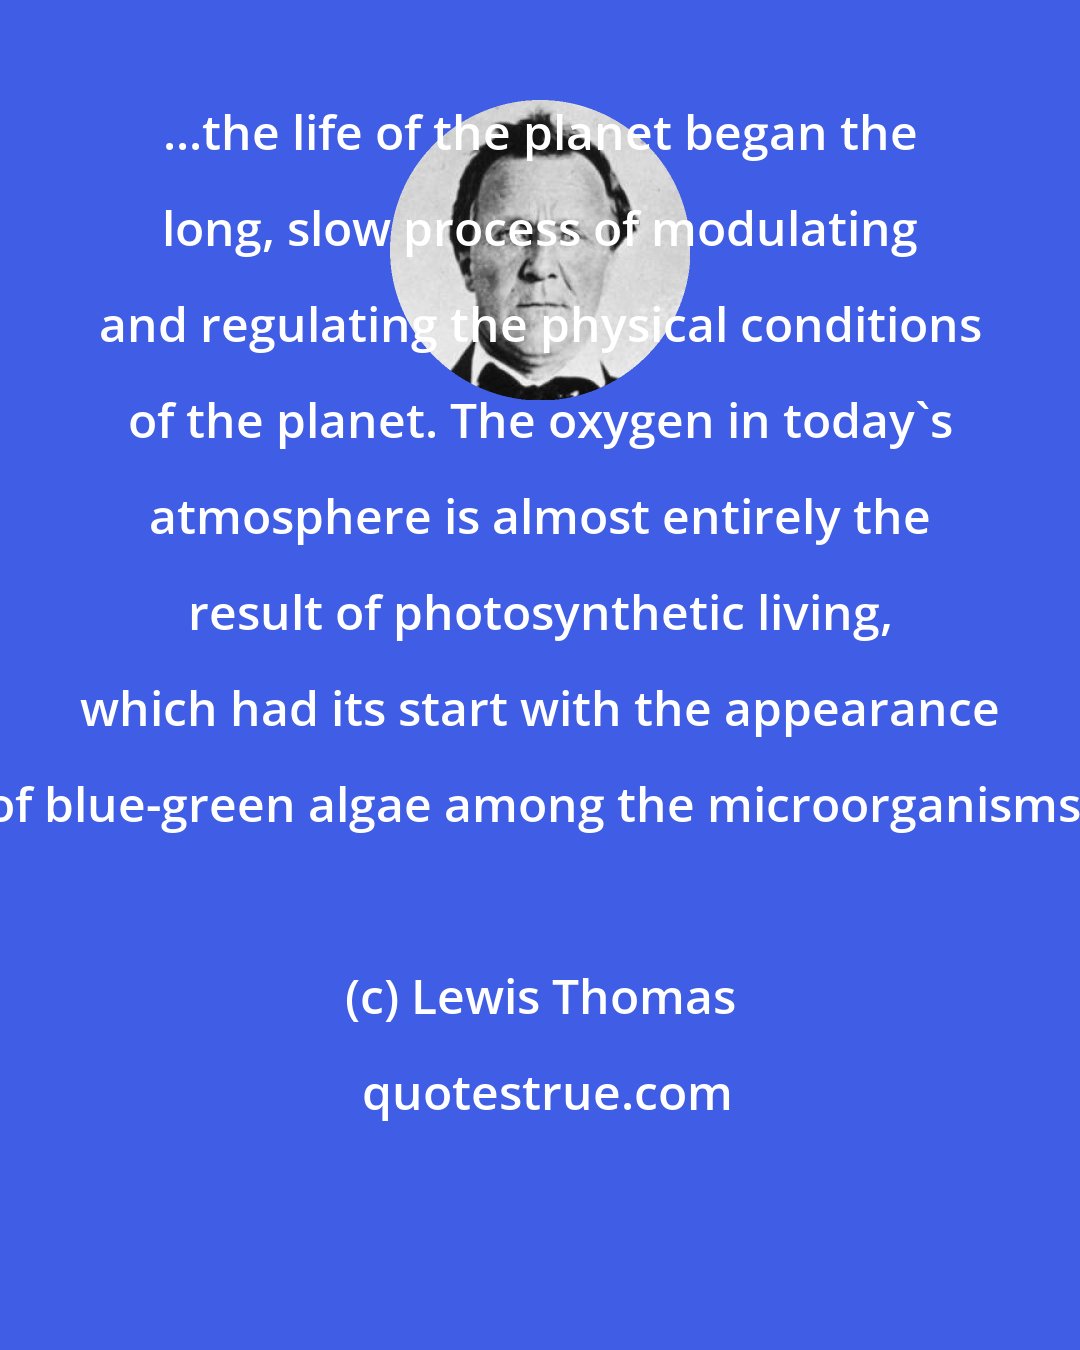 Lewis Thomas: ...the life of the planet began the long, slow process of modulating and regulating the physical conditions of the planet. The oxygen in today's atmosphere is almost entirely the result of photosynthetic living, which had its start with the appearance of blue-green algae among the microorganisms.